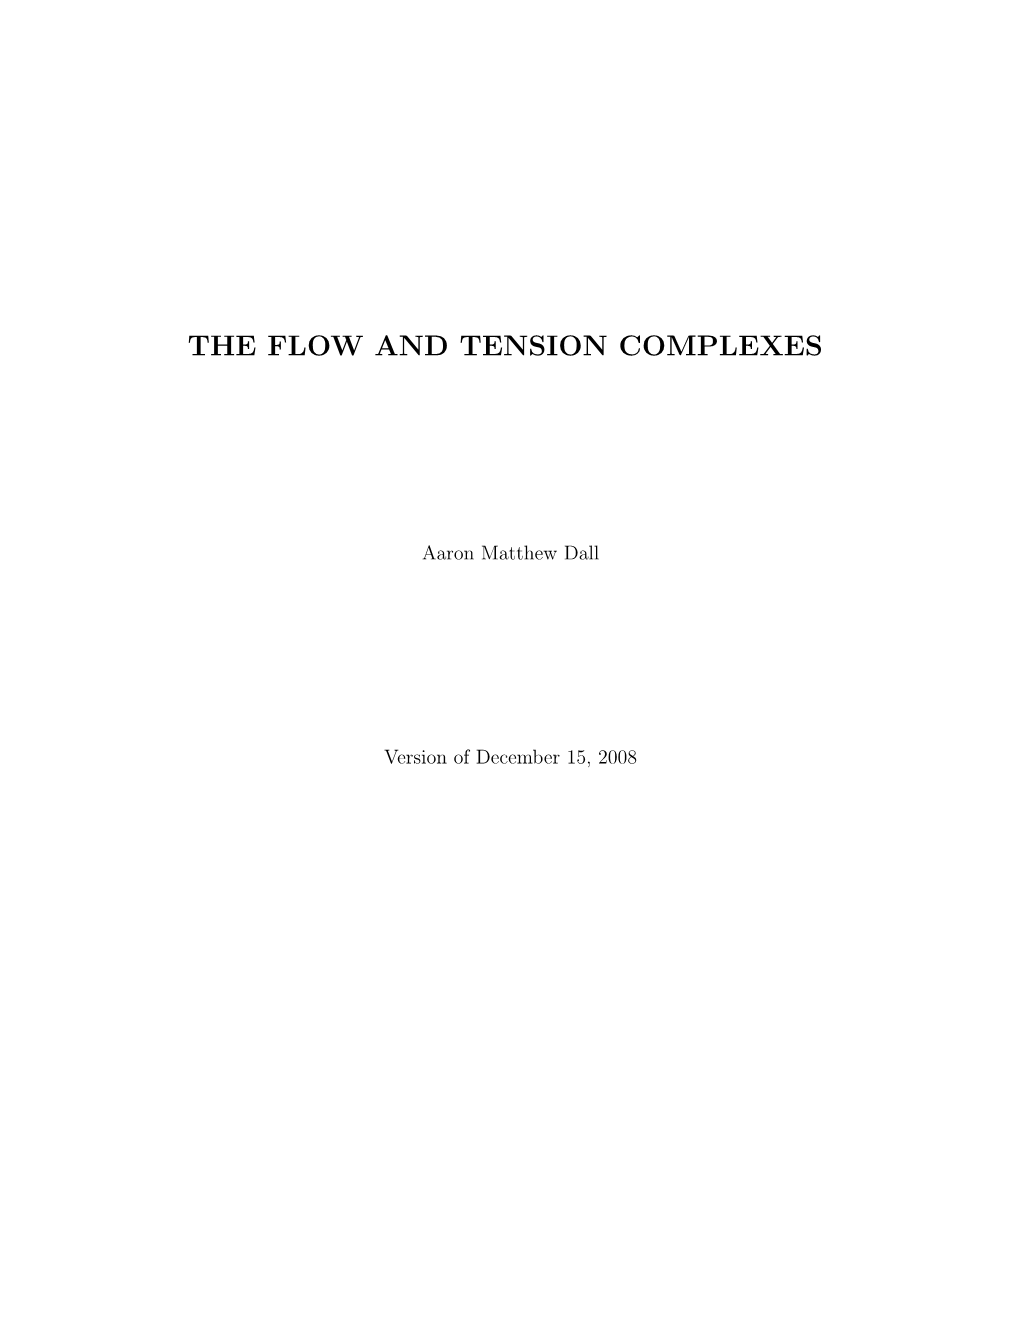 The Flow and Tension Complexes